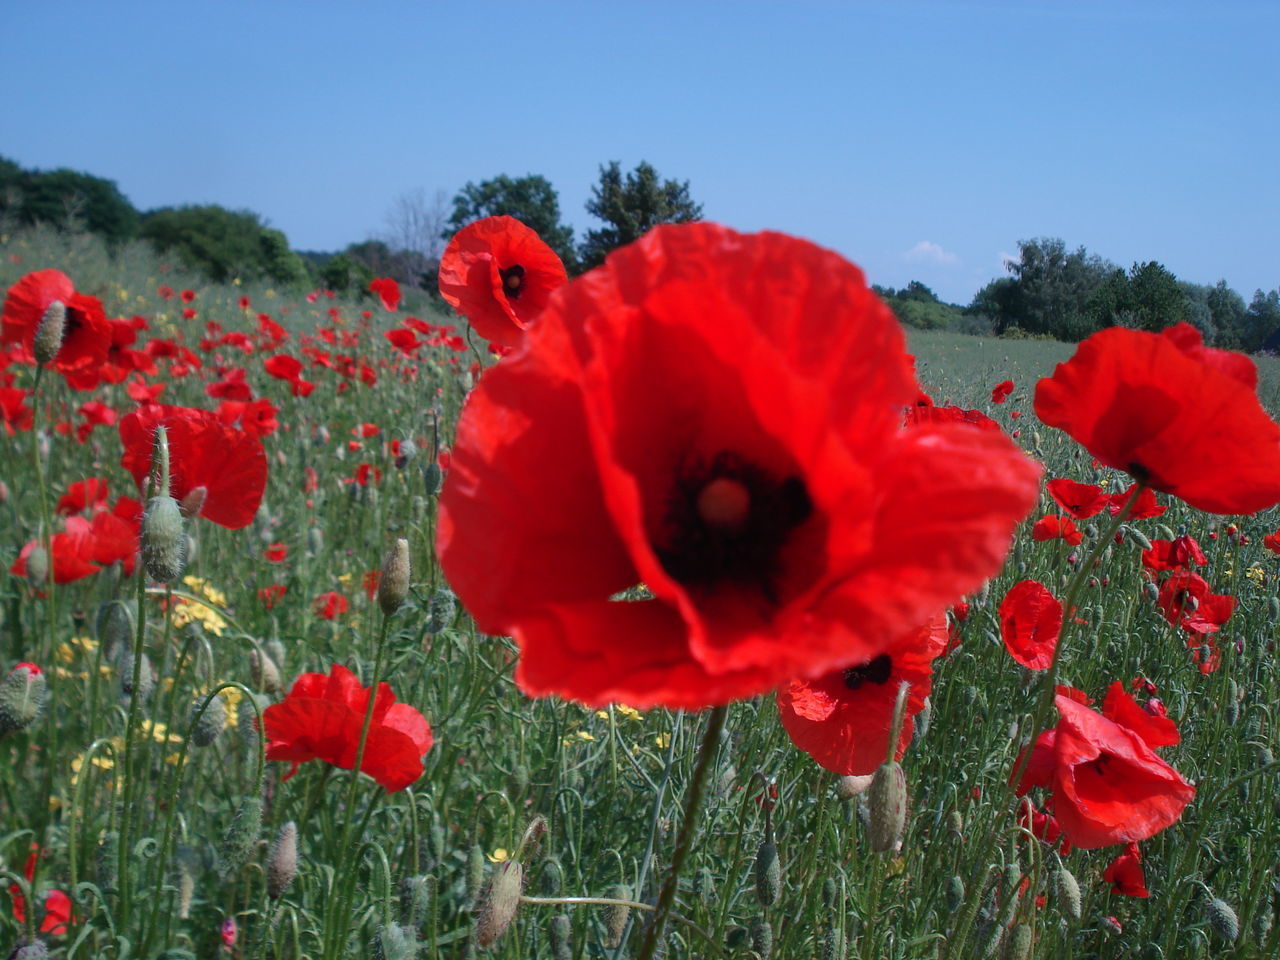 CLOSE-UP OF RED POPPY FLOWER ON FIELD